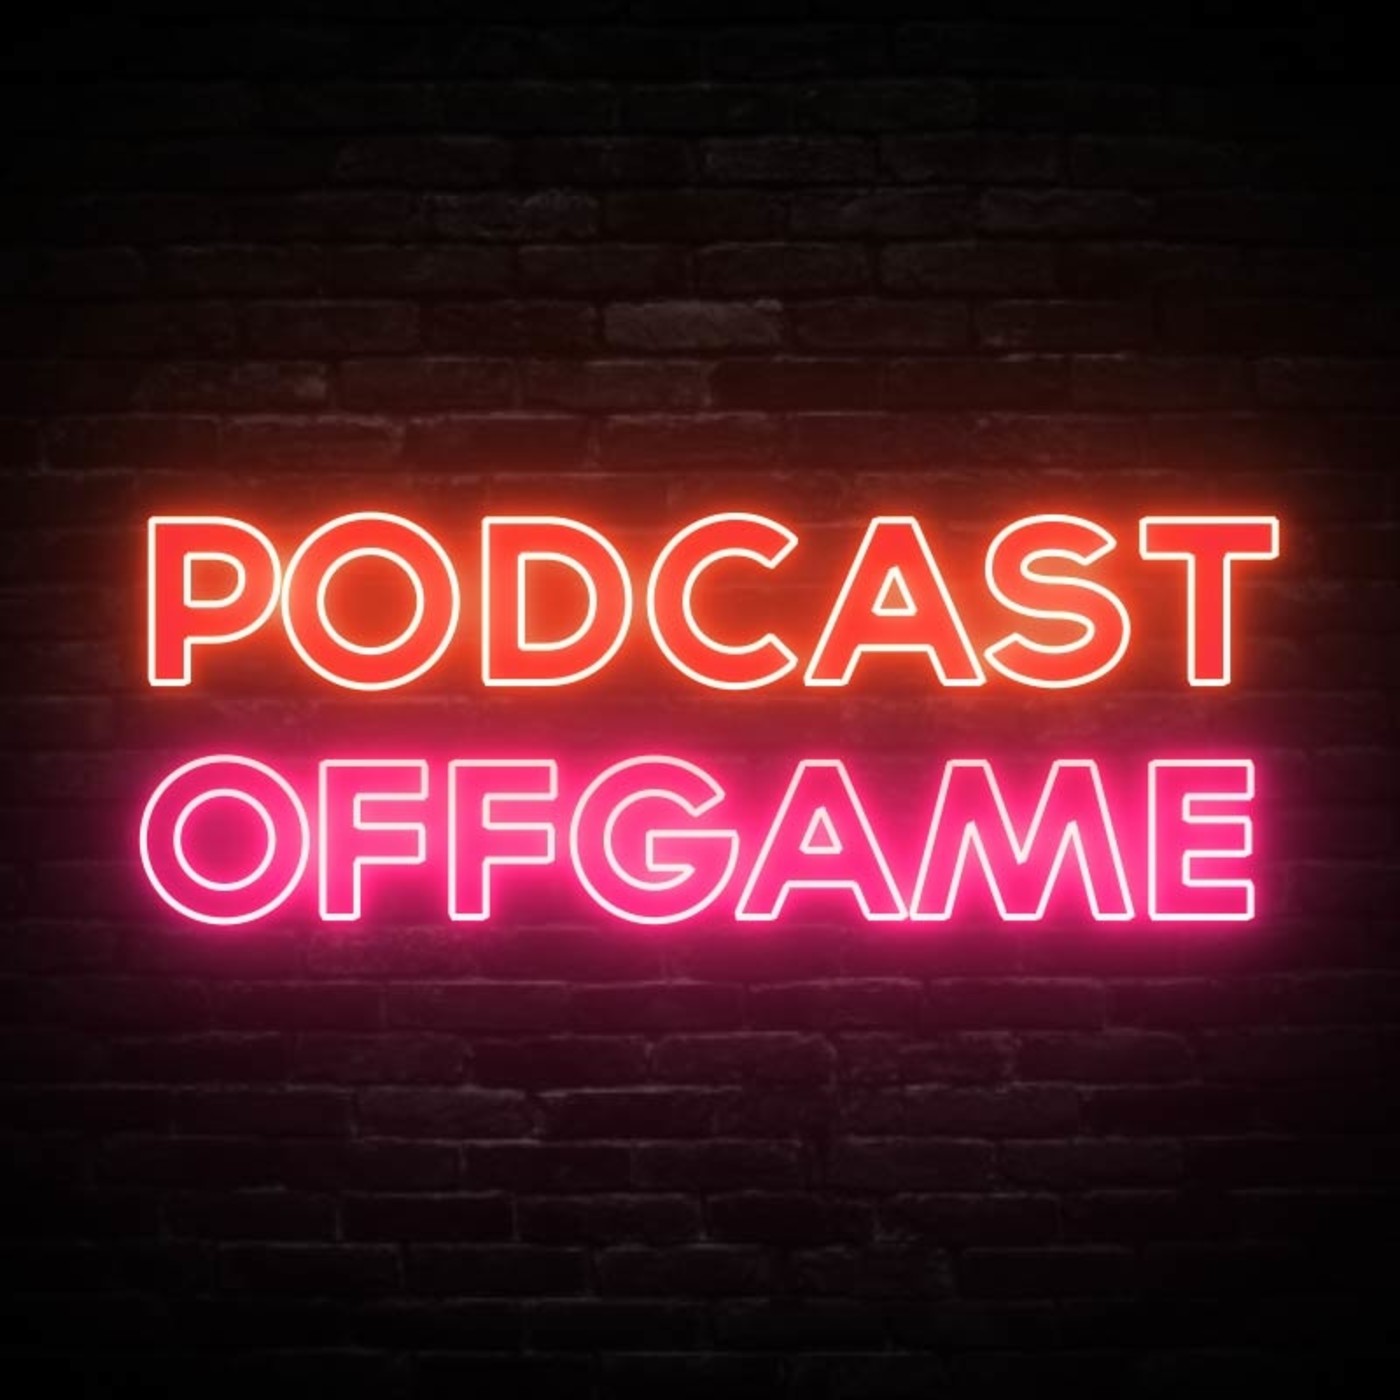 PODCAST OFFGAME